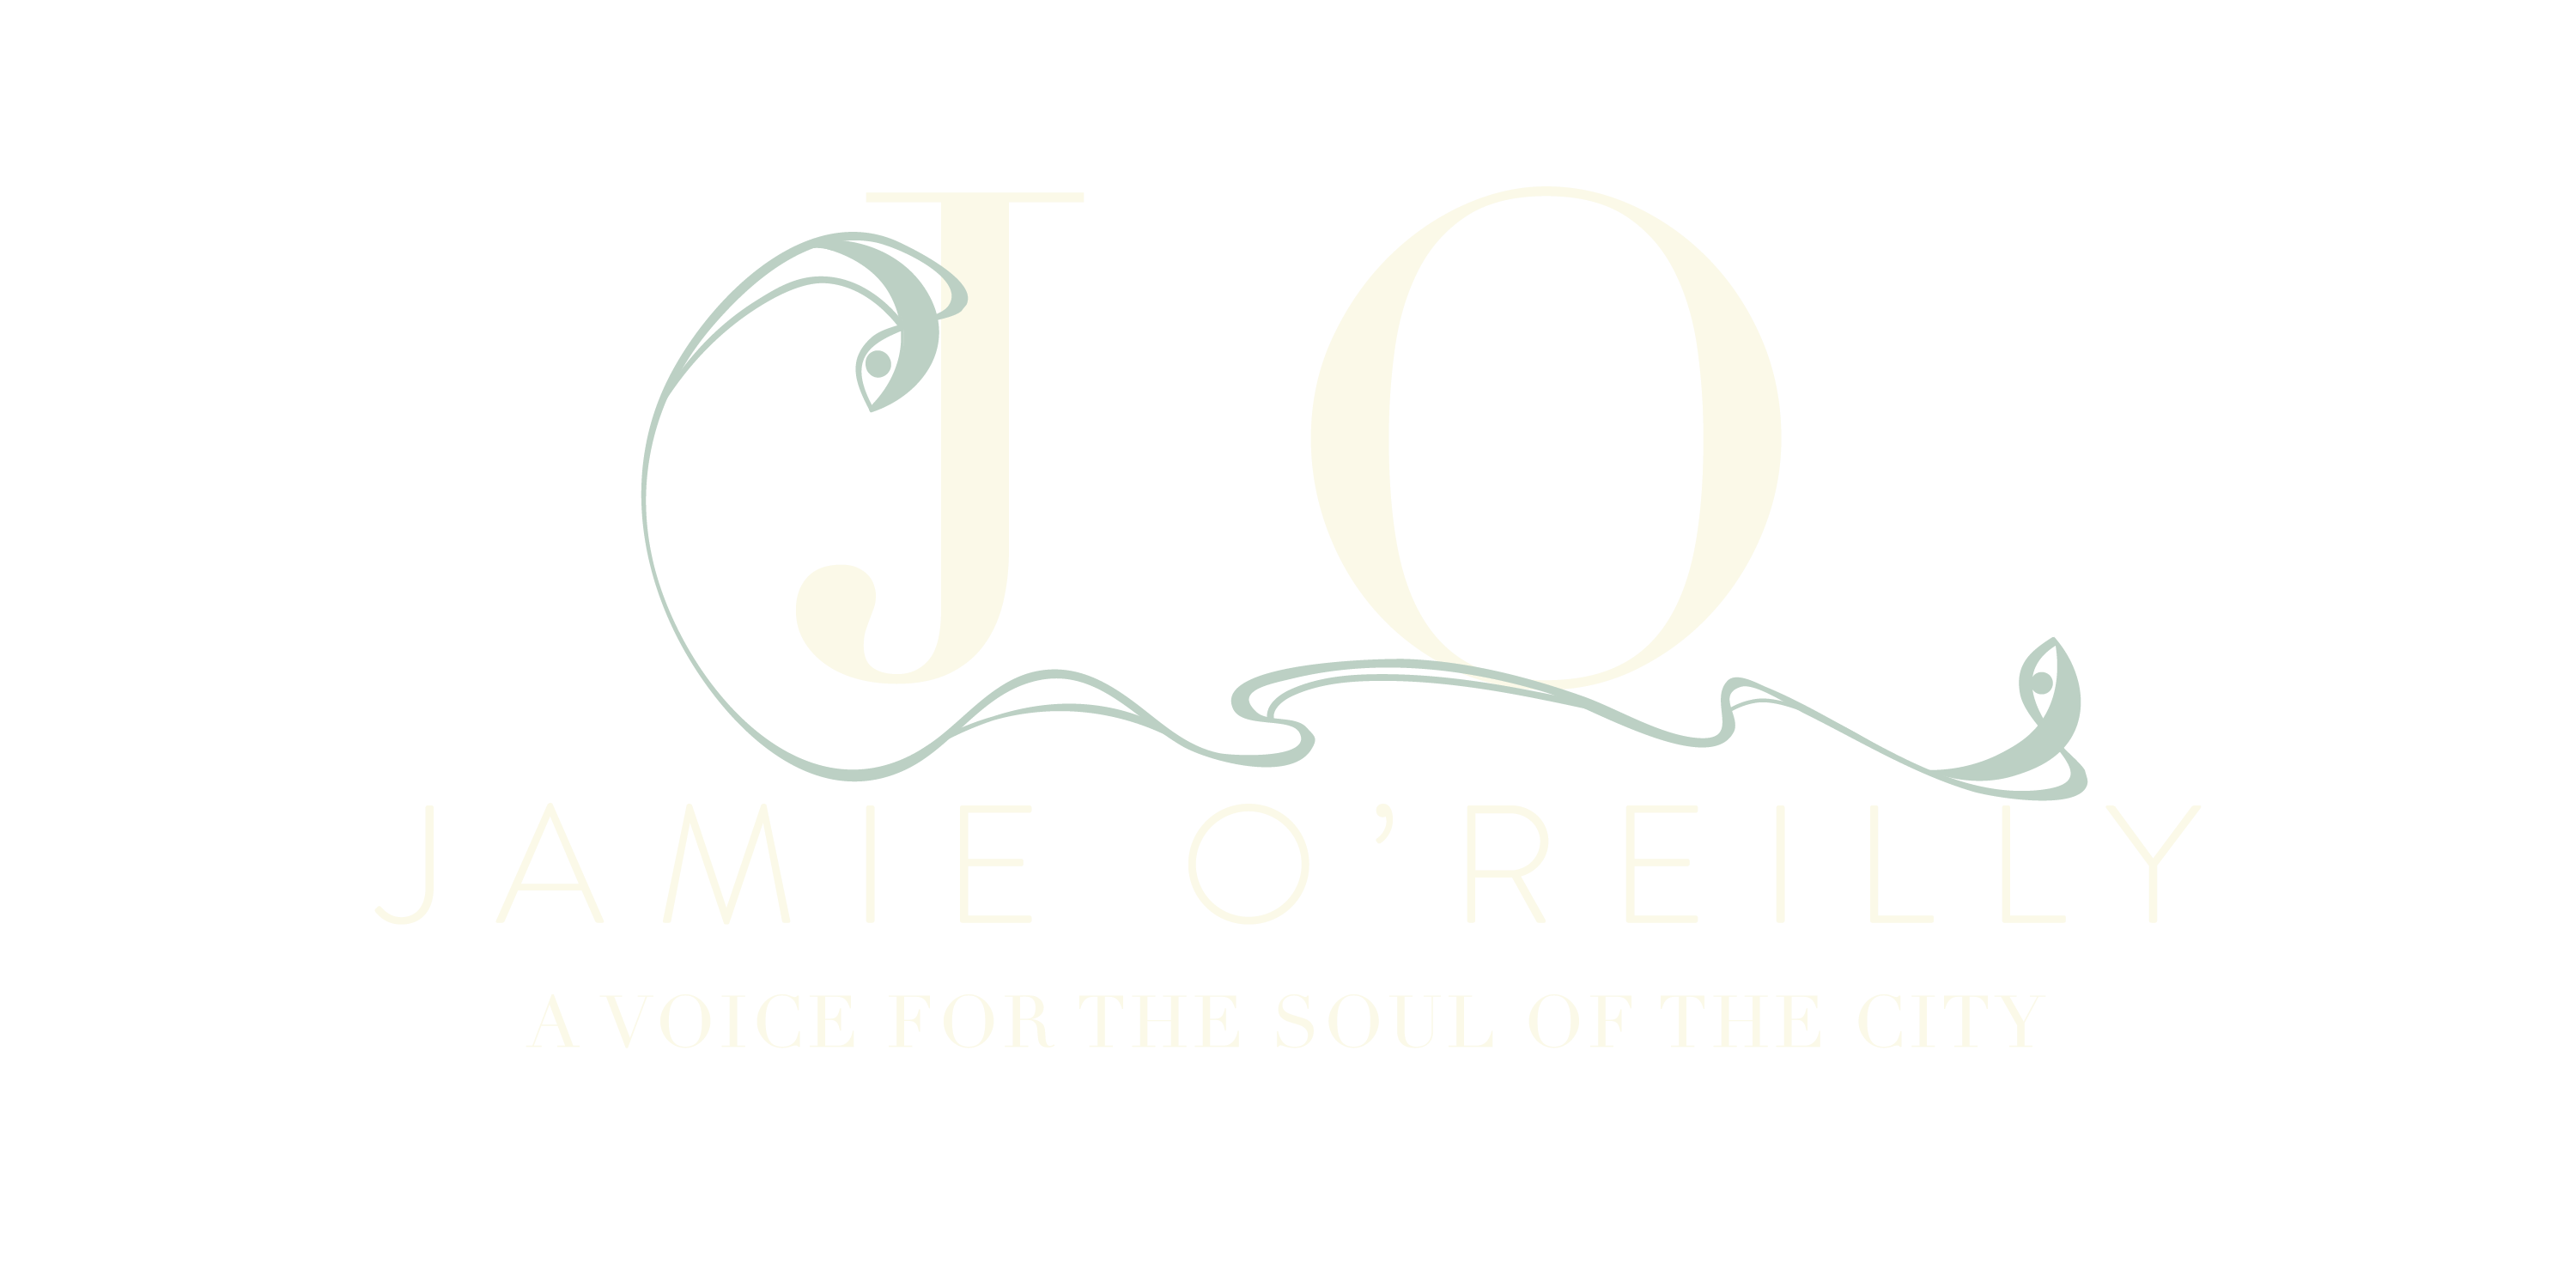 In Old Chicago on WFMT Radio - J. O'Reilly Productions, Cultural